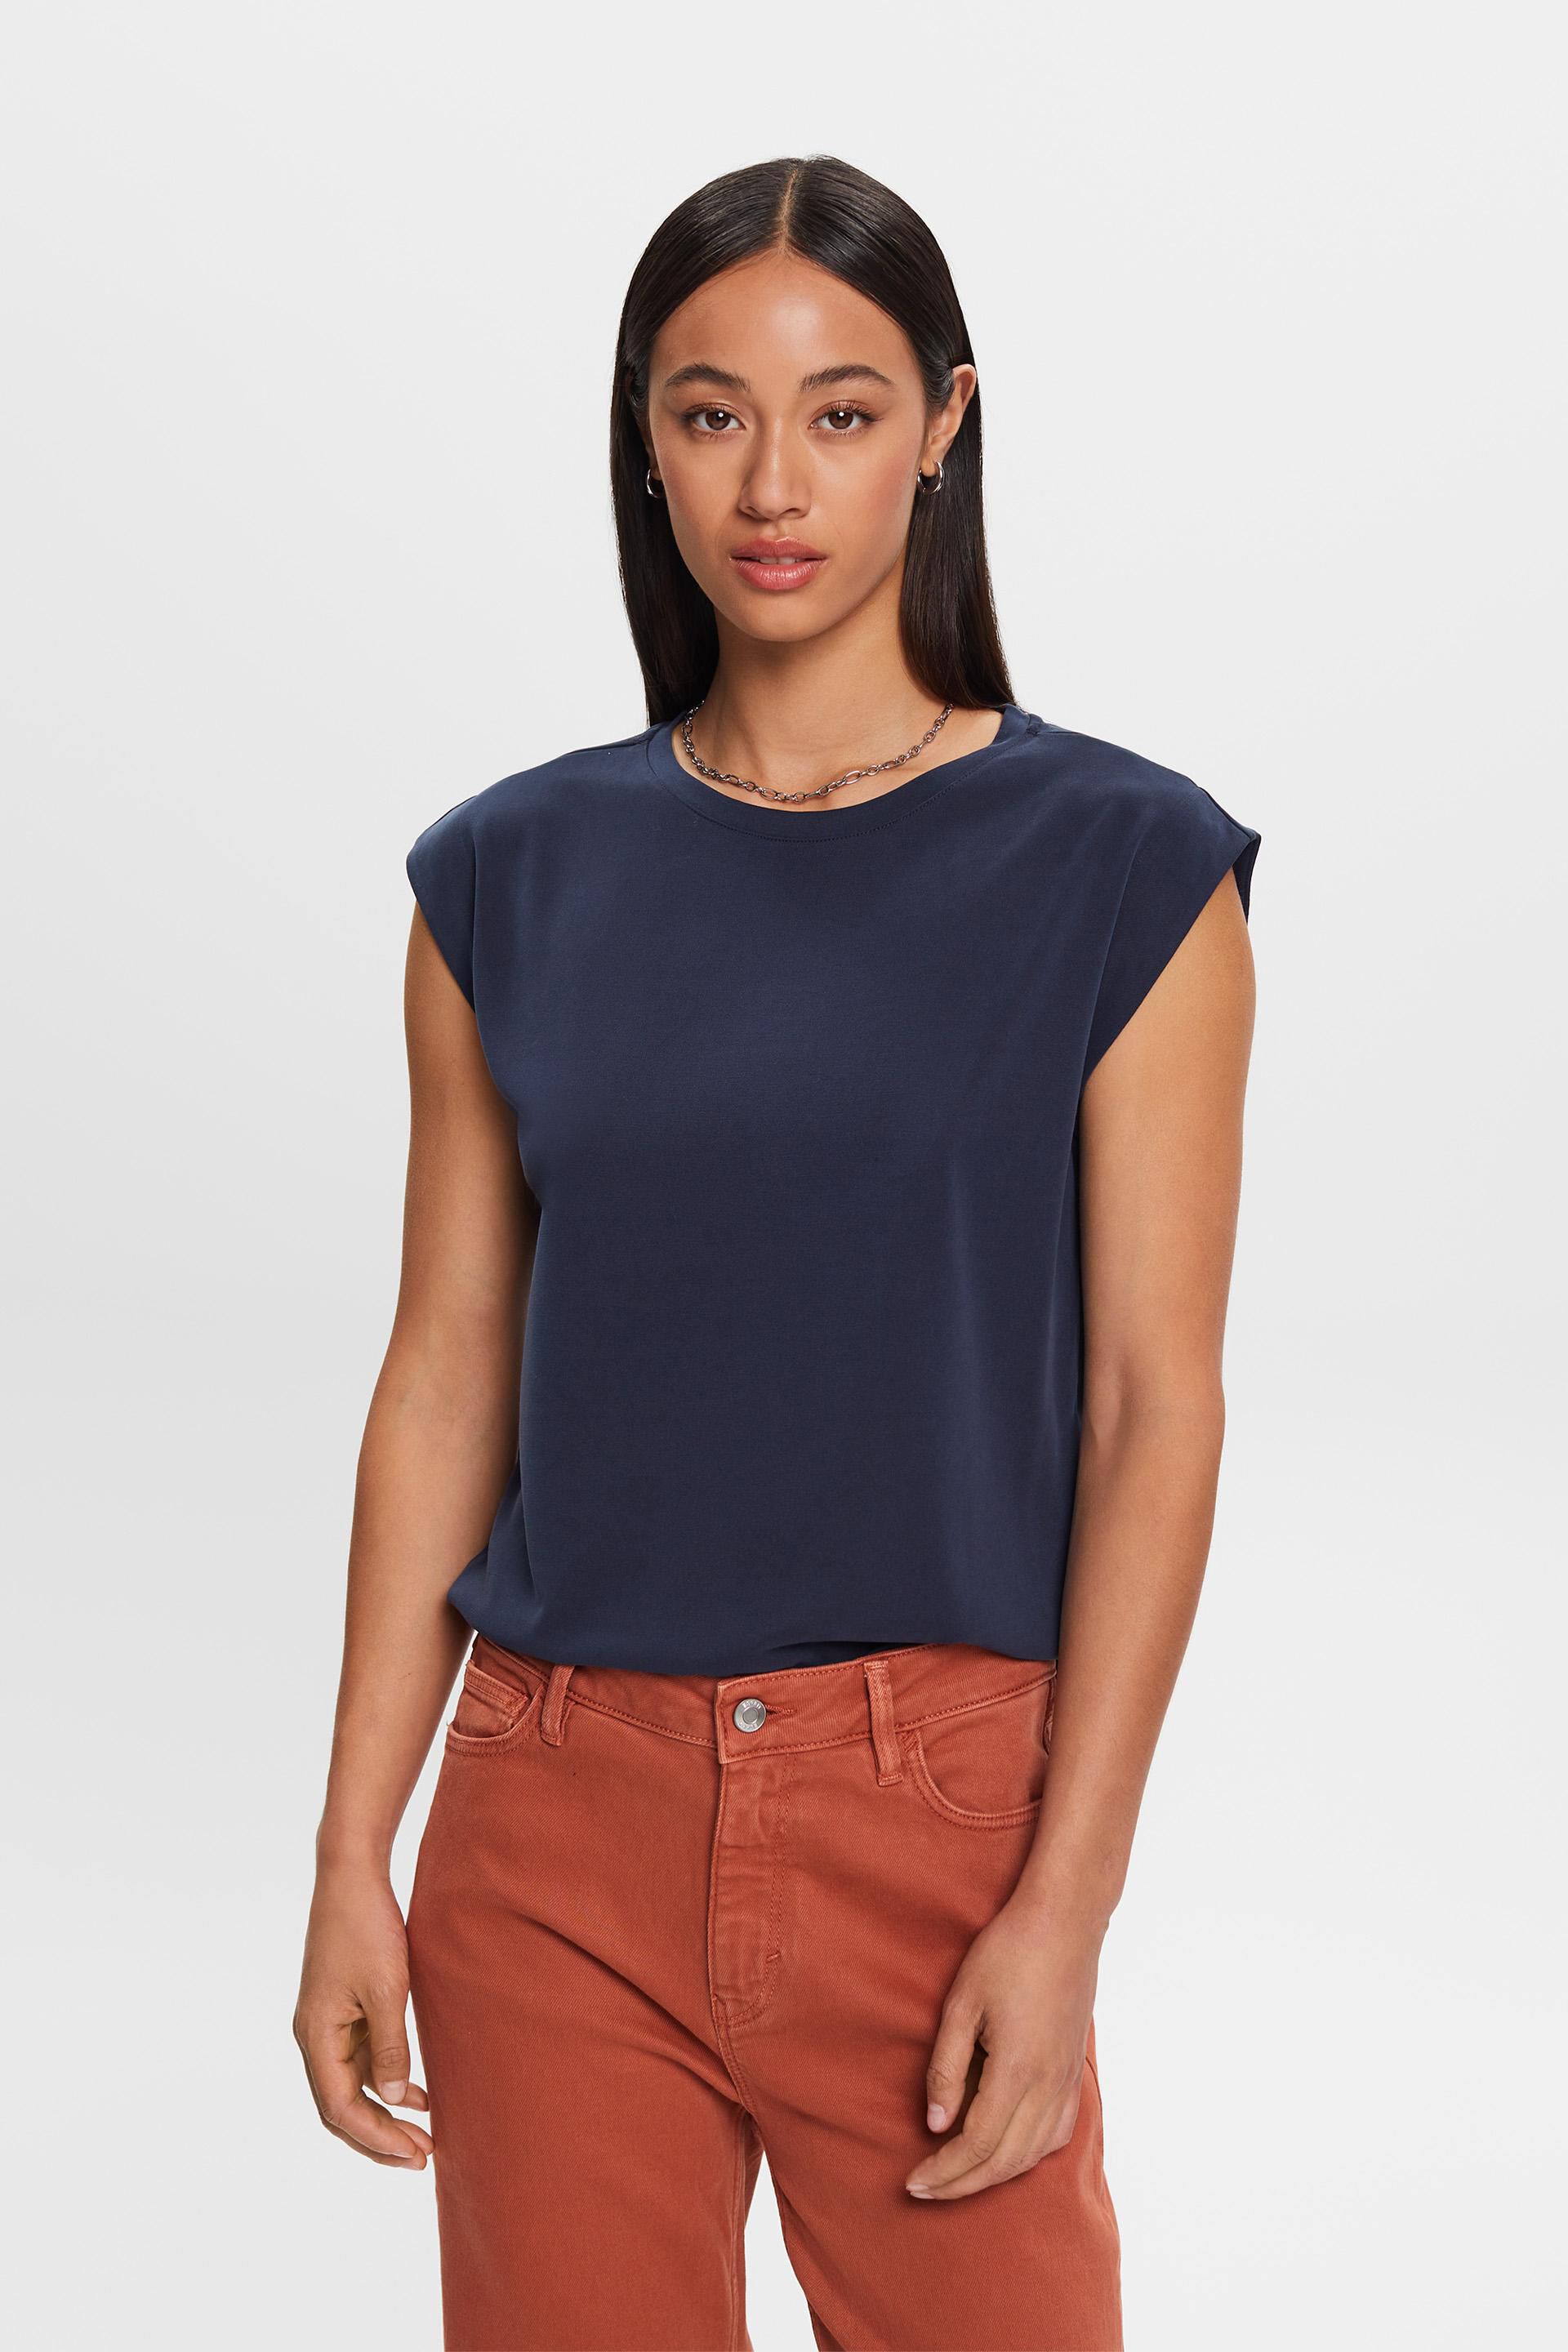 Esprit with touch soft Jersey a top